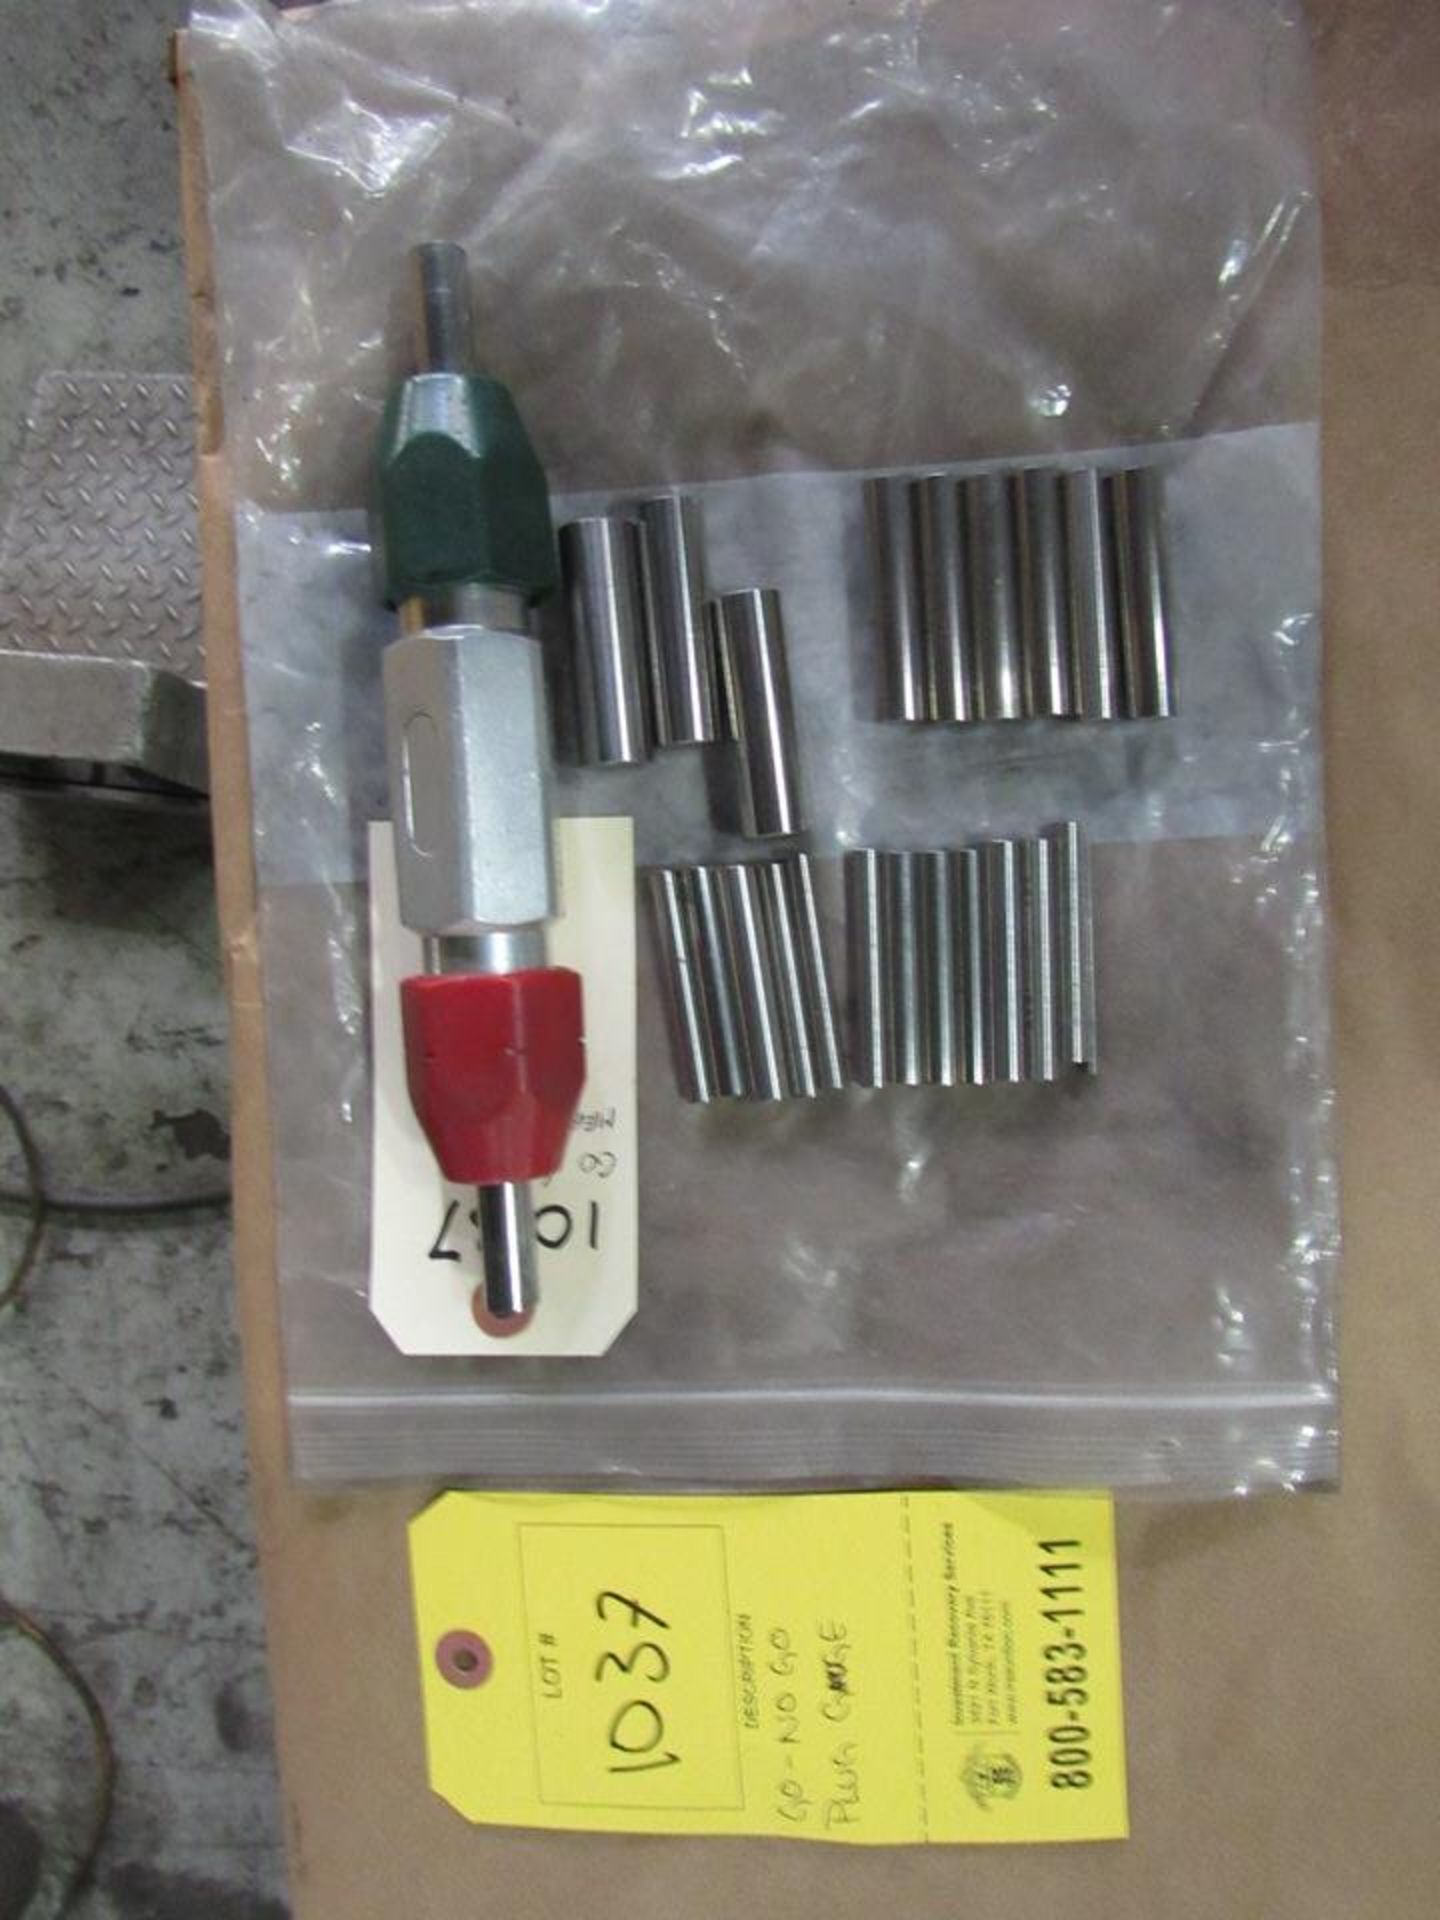 Go / No Go Cylindrical Plug Gauge, 0.251 - 0.500, with assorted gauge pins (LOCATION: 3603 Melva - Image 2 of 2